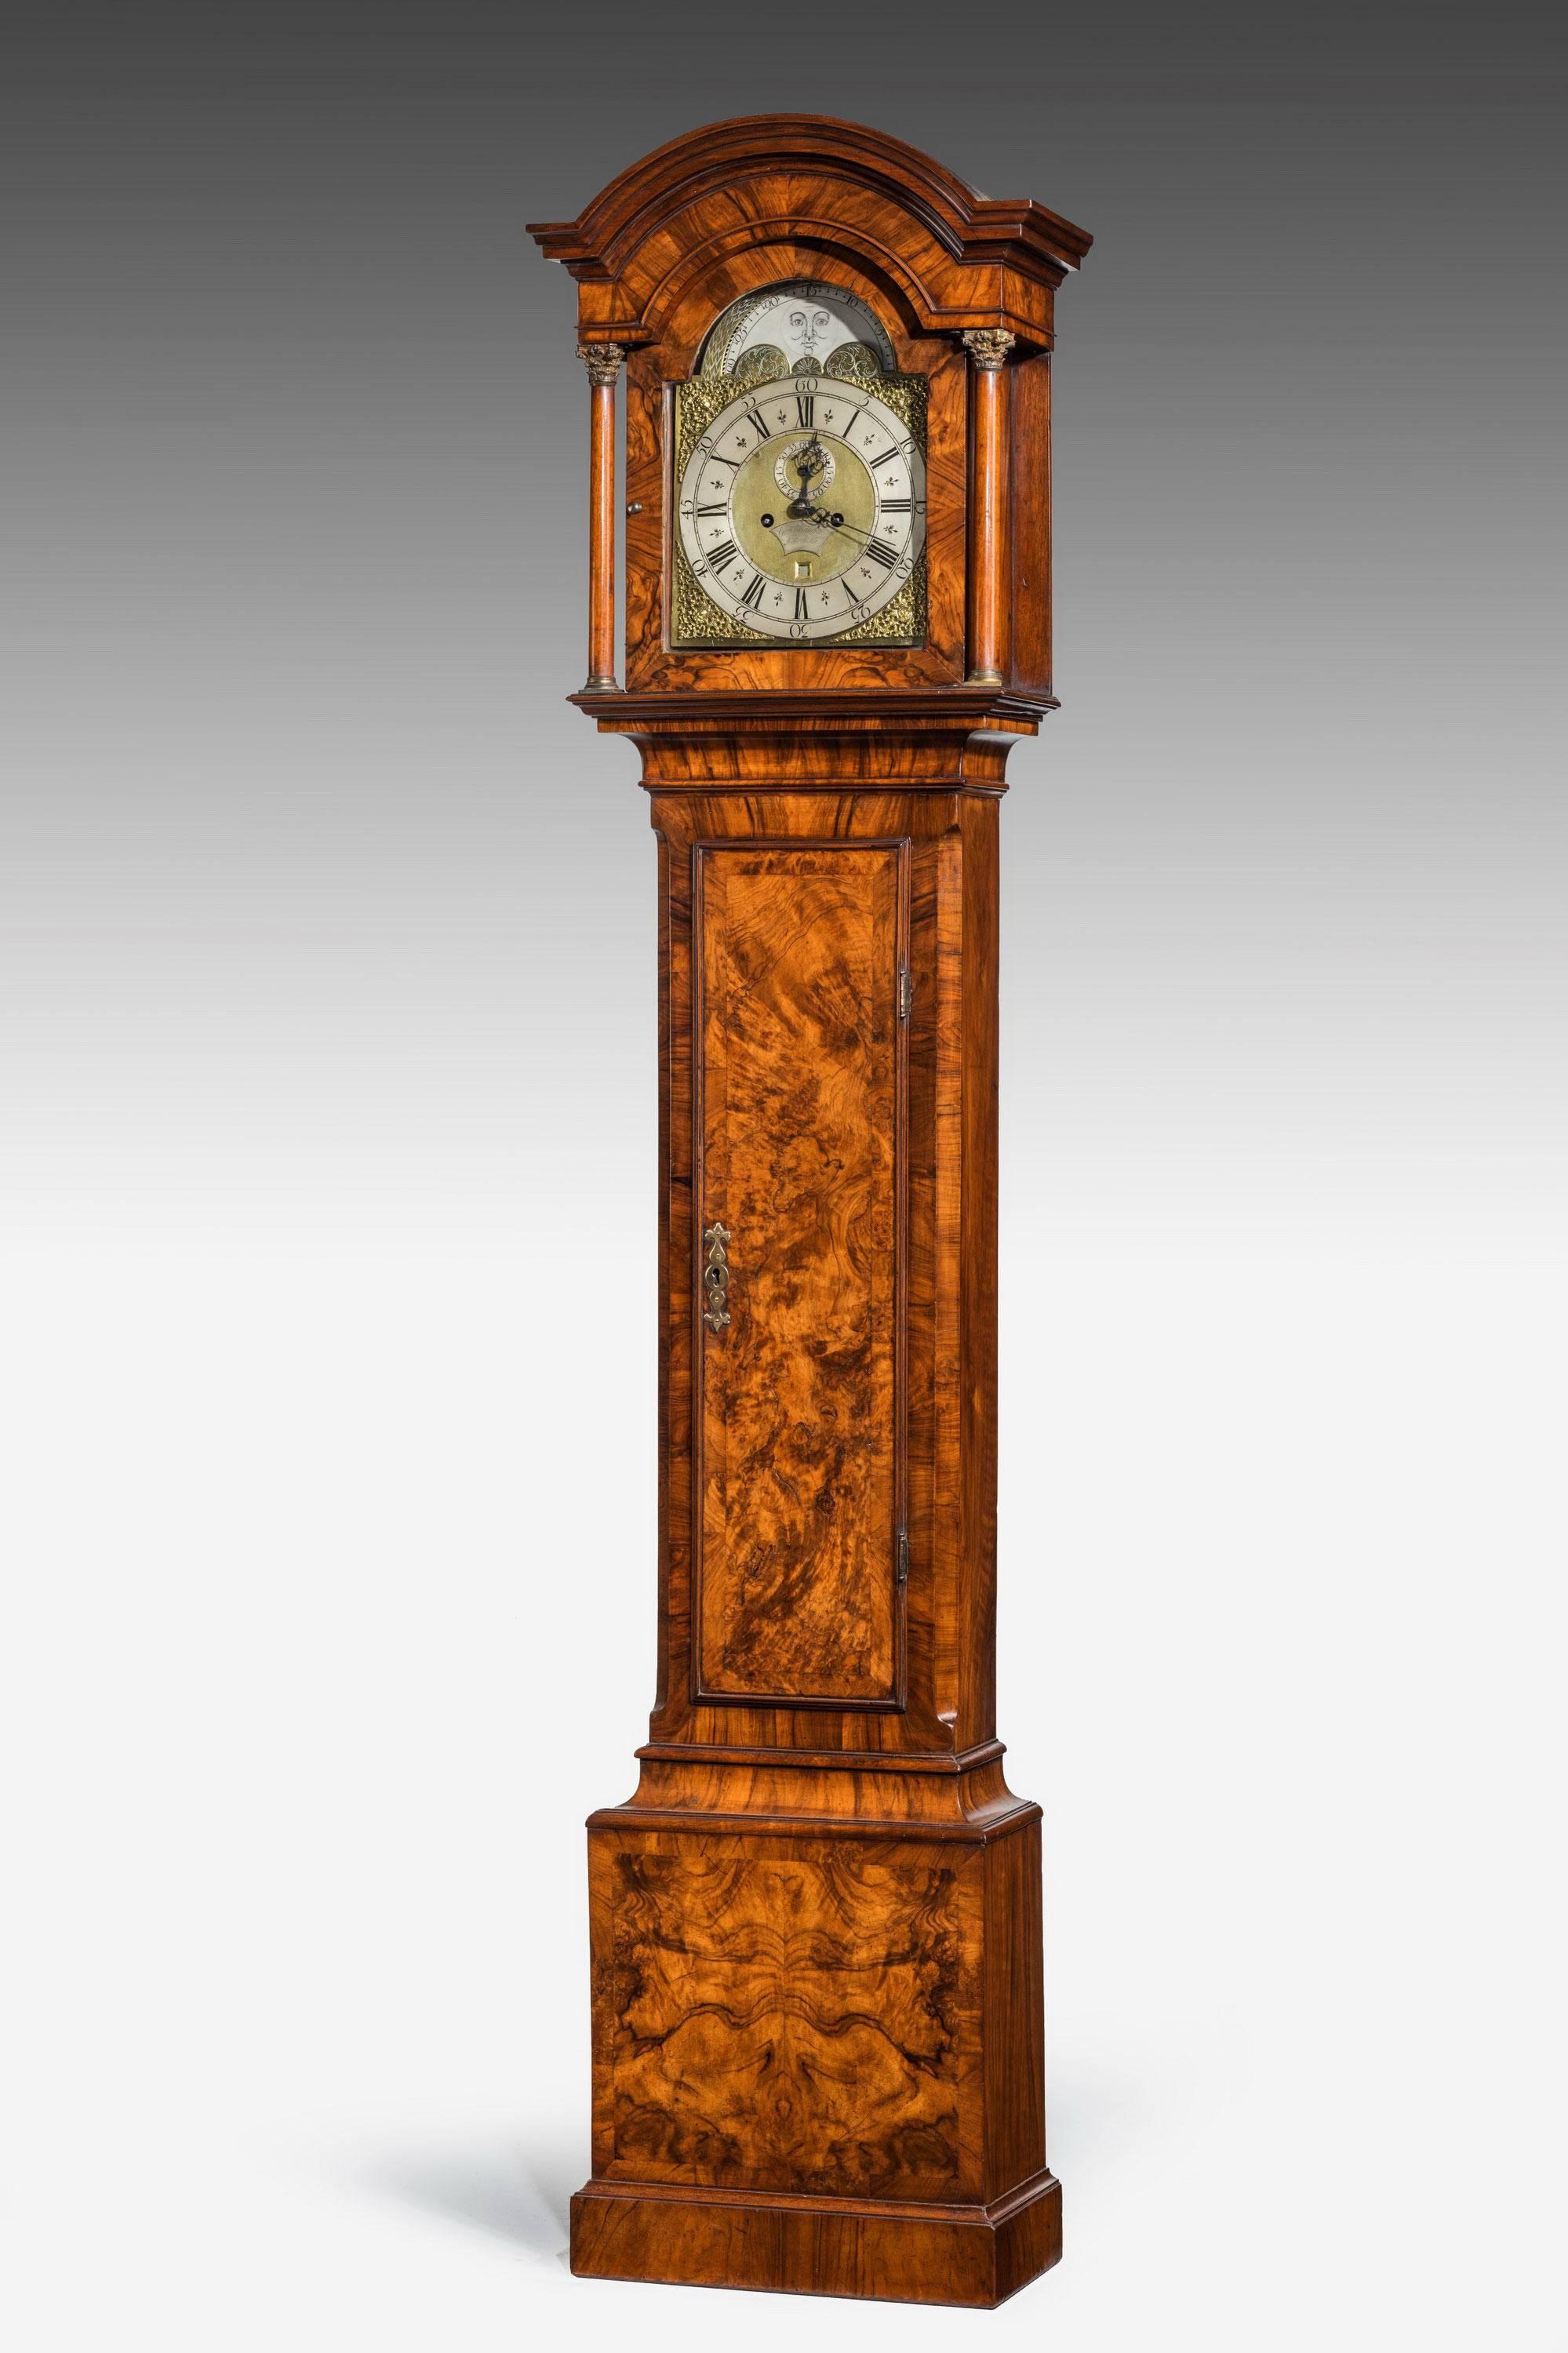 A good mid-George III period walnut eight-day longcase clock by George Chambers of Newcastle. Silver and gilt bronze face, subsidiary dials including a moon and date to the top. Finely cross banded in contrasting timbers. Excellent overall